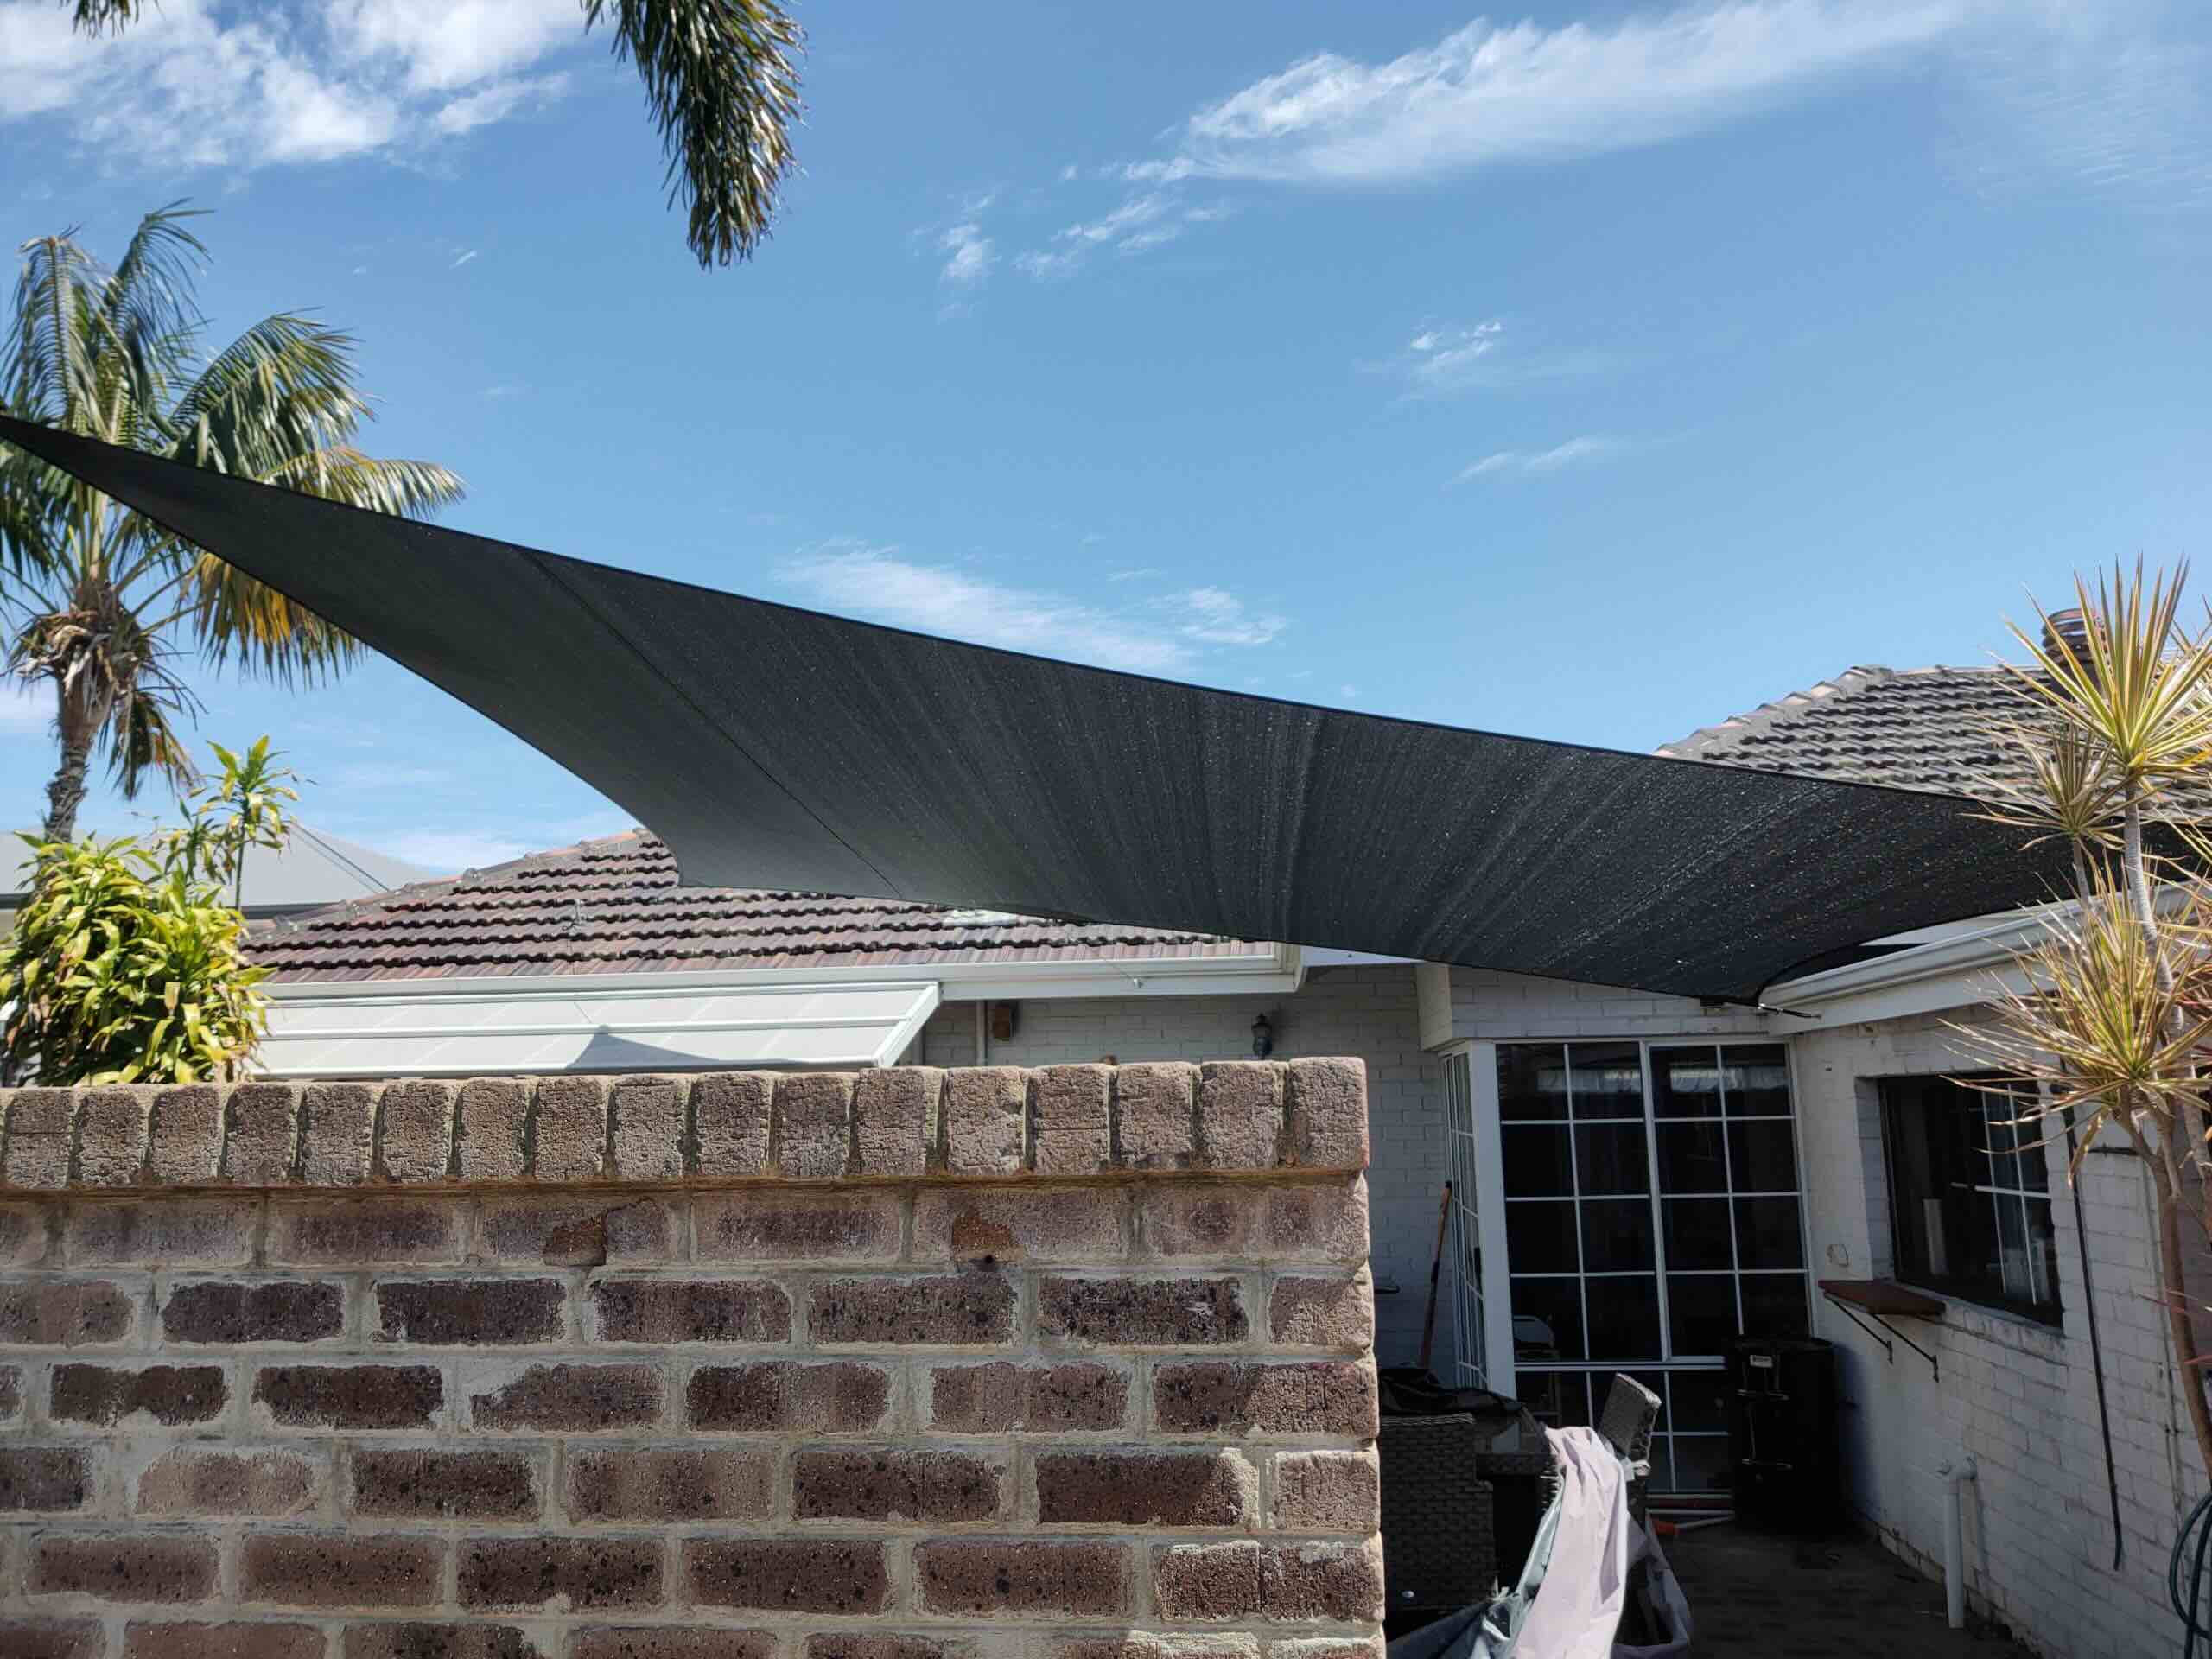 How To Attach Sun Shade To Brick Wall